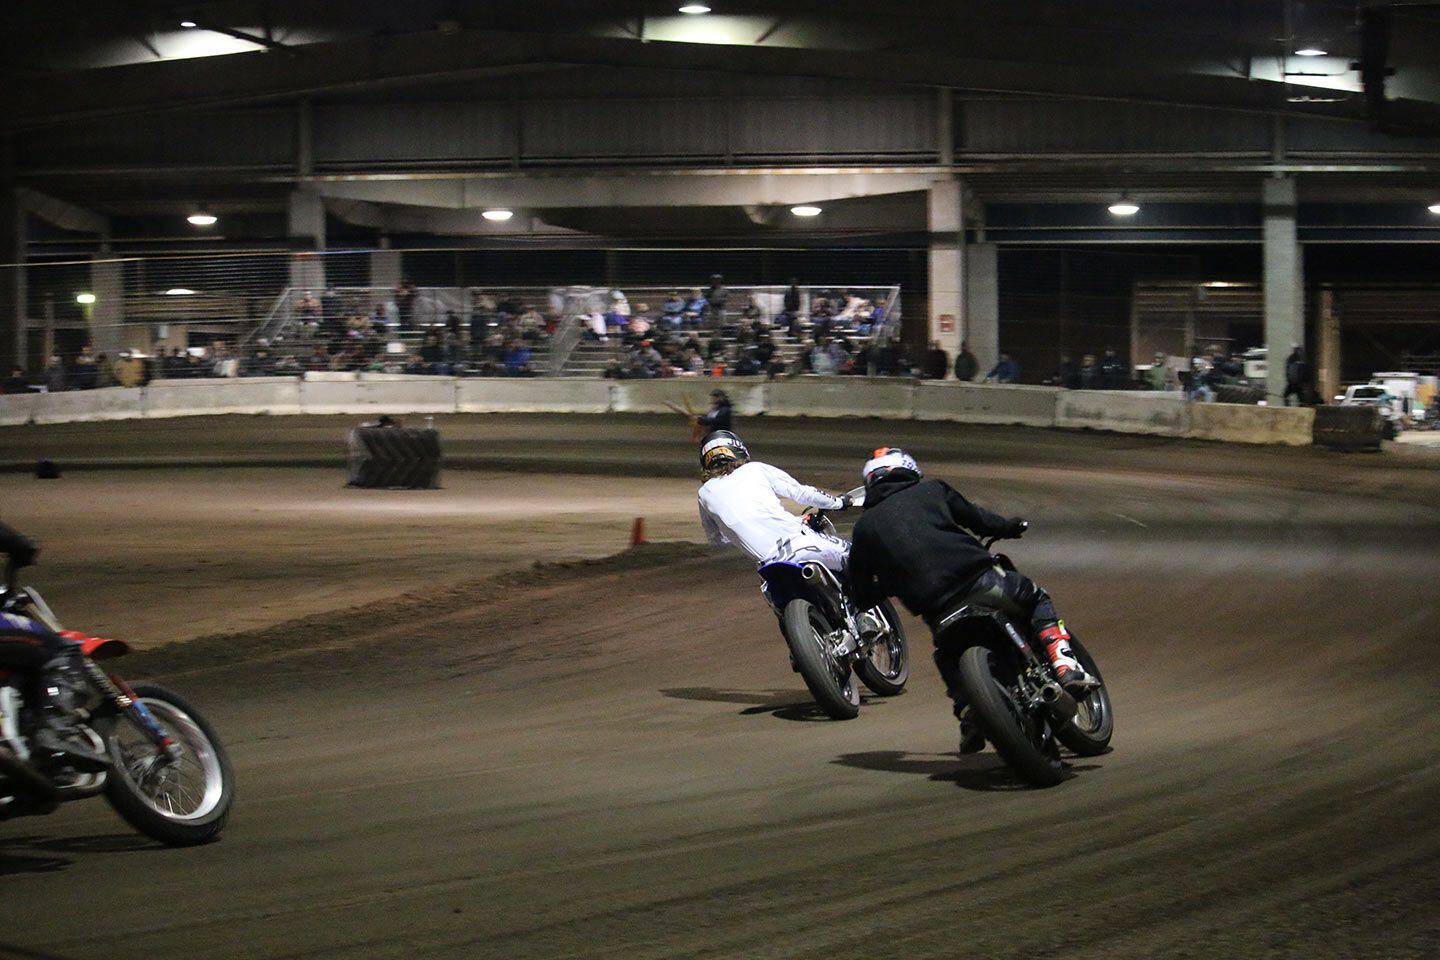 The track was tacky and the racing was fast at Salem Indoor Speedway as riders competed for cash prizes at the Cherry City Classic.